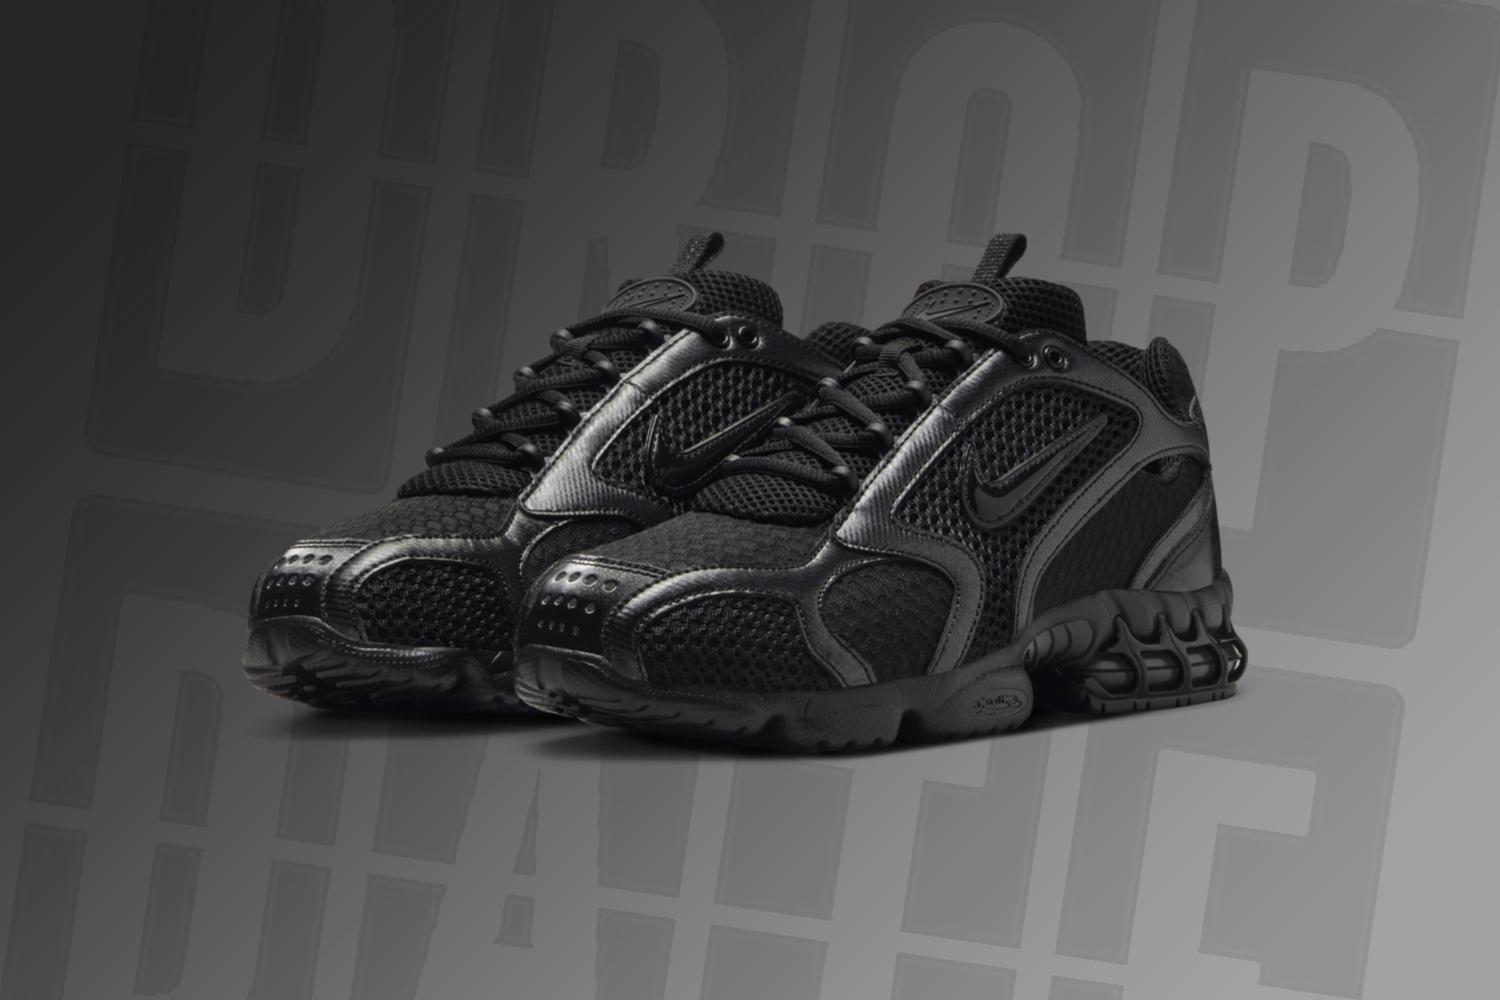 The Nike Air Zoom Spiridon Cage 2 Gets Stealthy Like Xenomorph